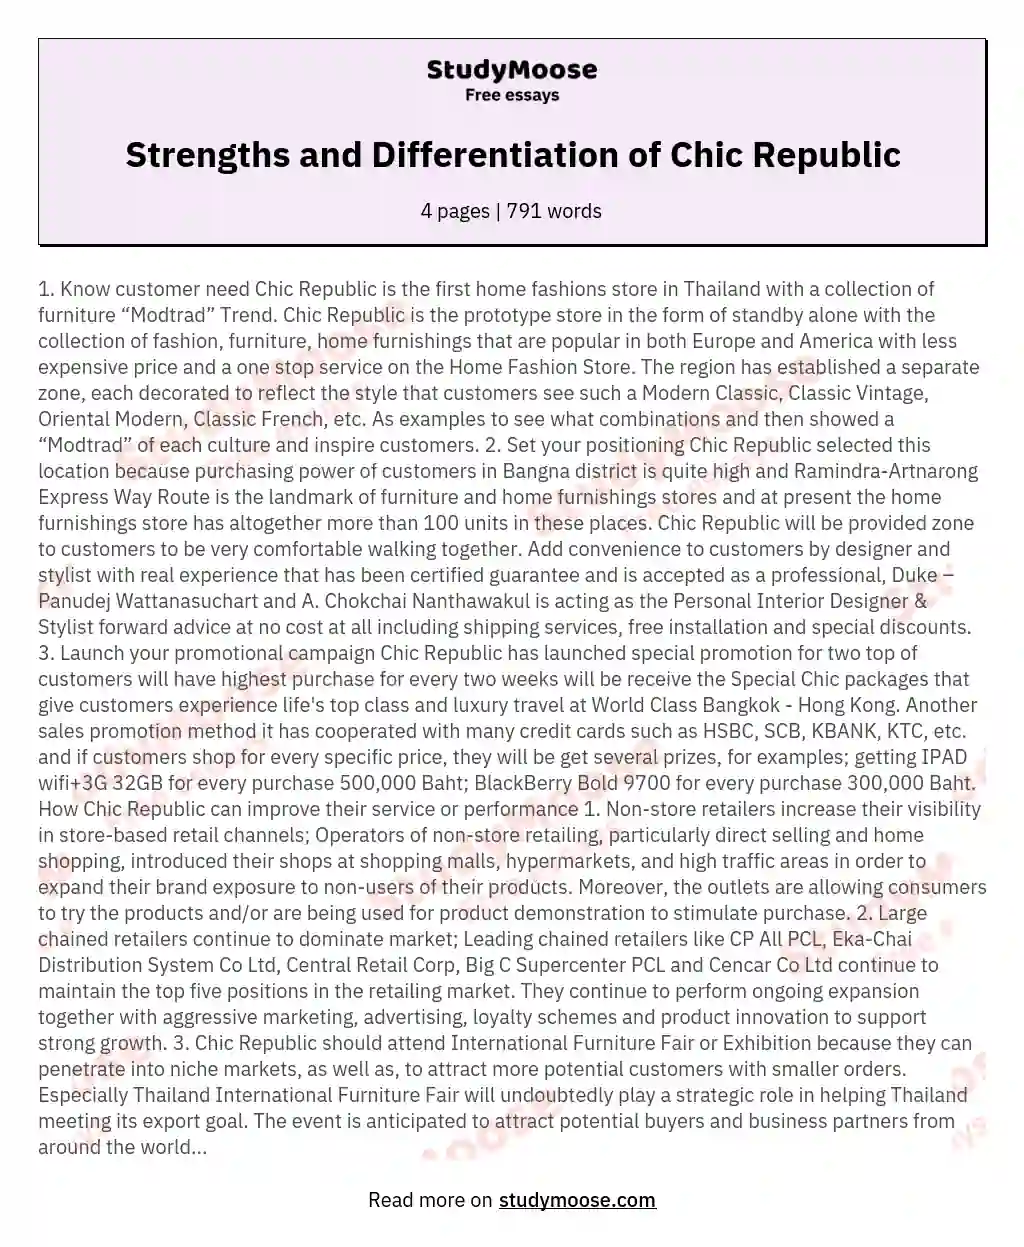 Strengths and Differentiation of Chic Republic essay